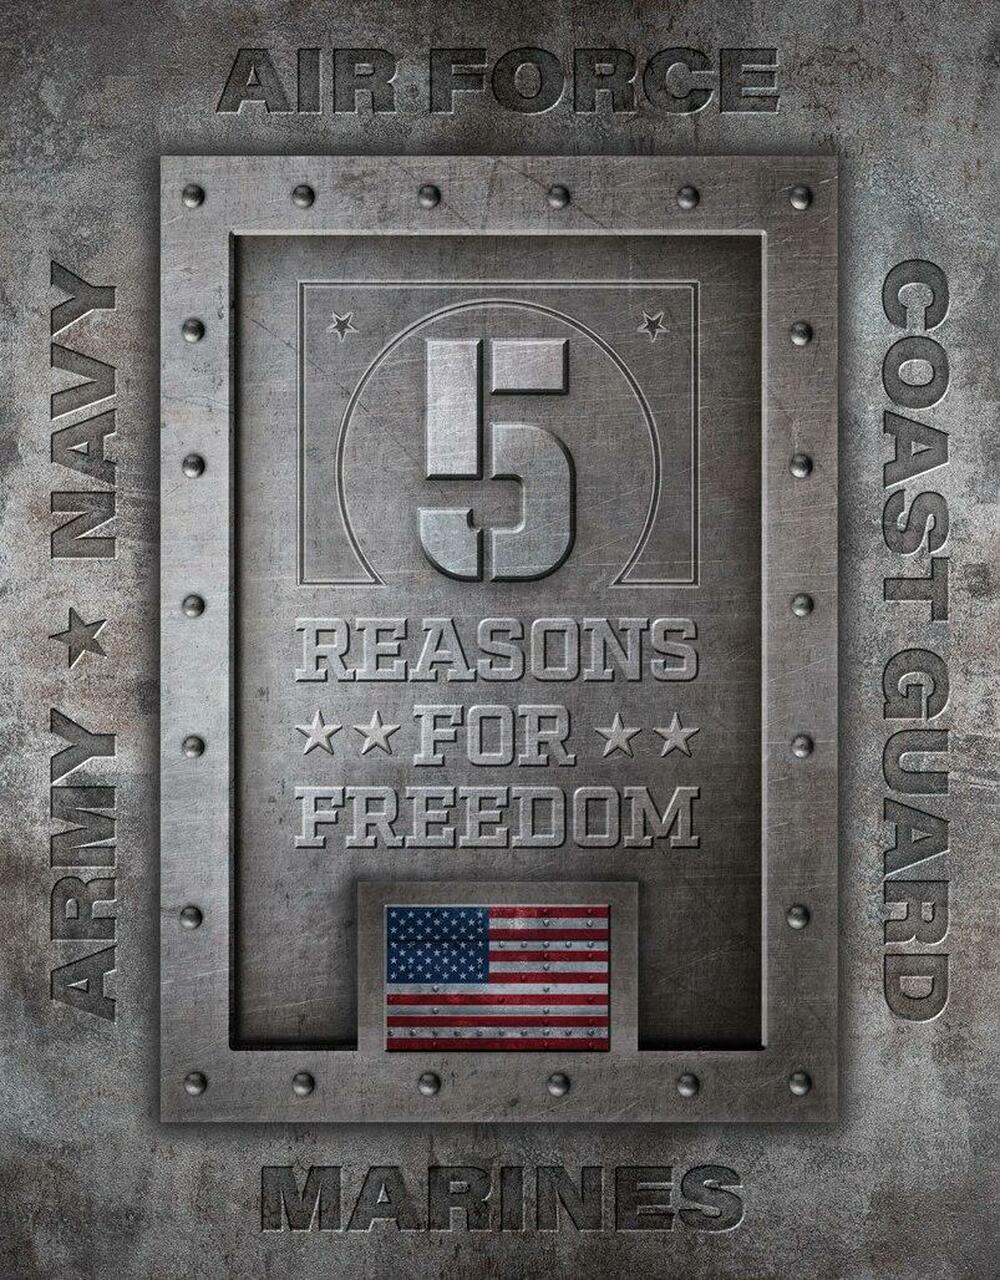 5 Reasons For Freedom 12.5" x 16" Metal Tin Sign - 2432